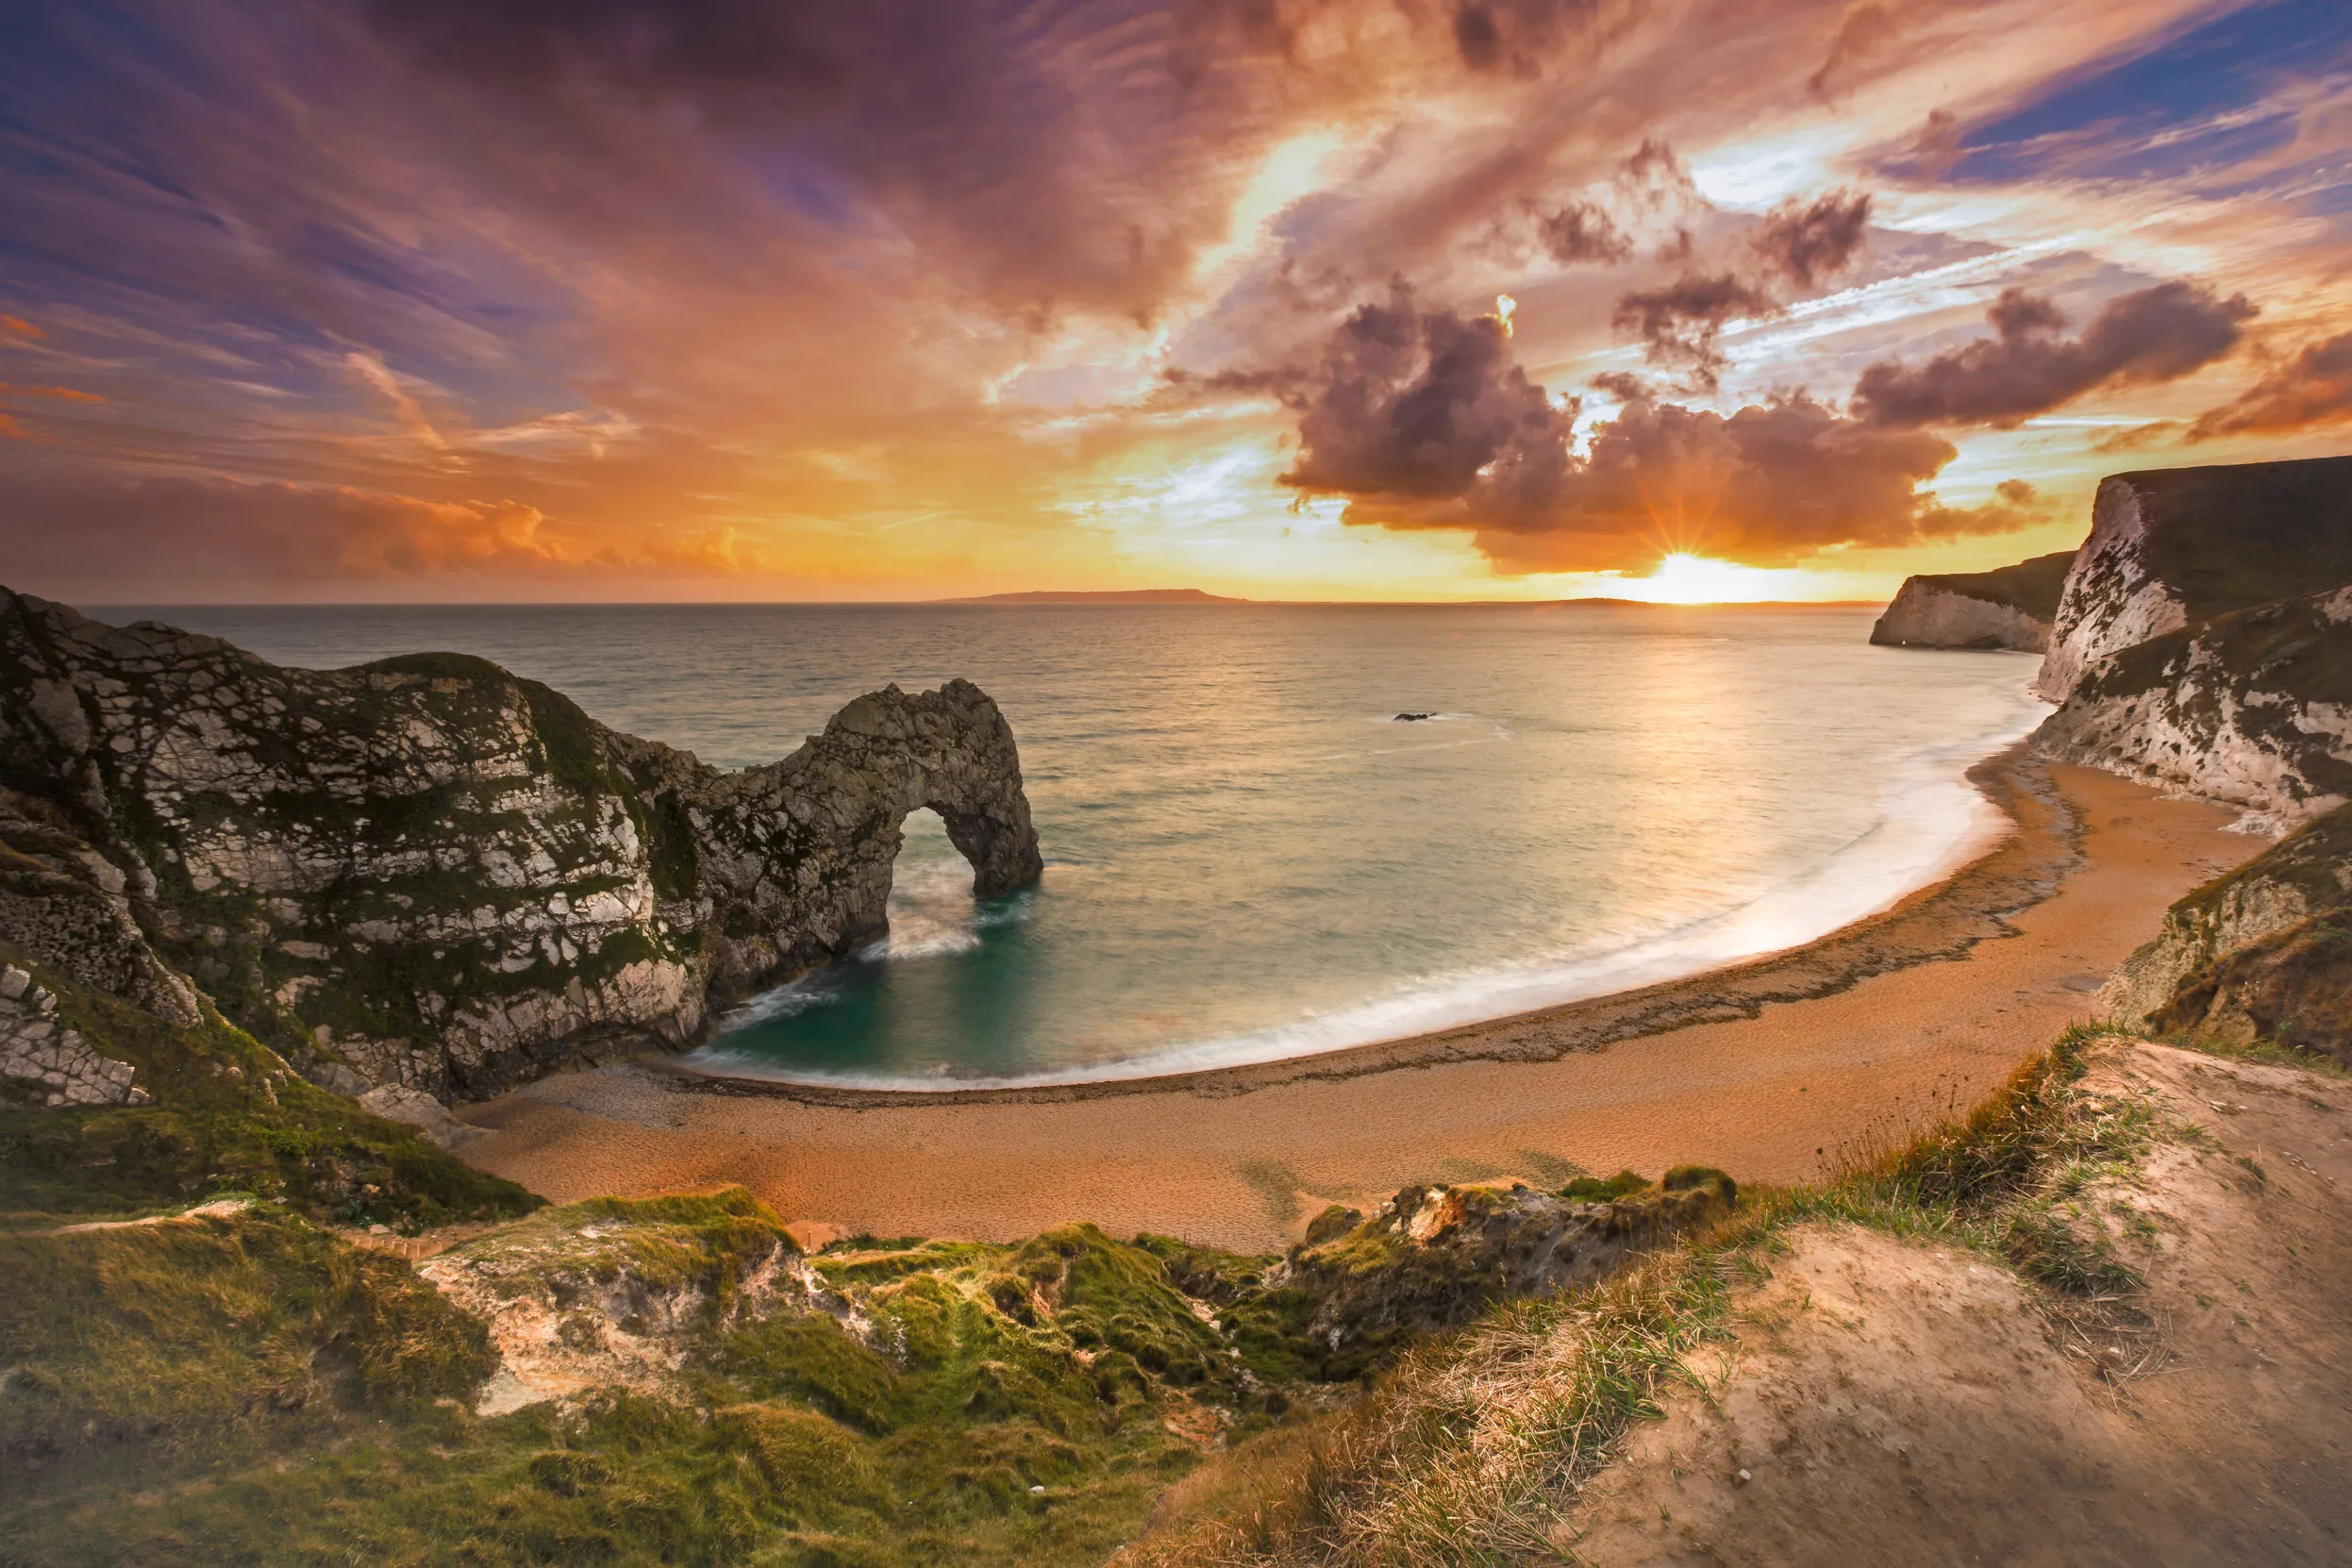 Durdle door, seen from the cliffs above, looking across the beach and out to sea.